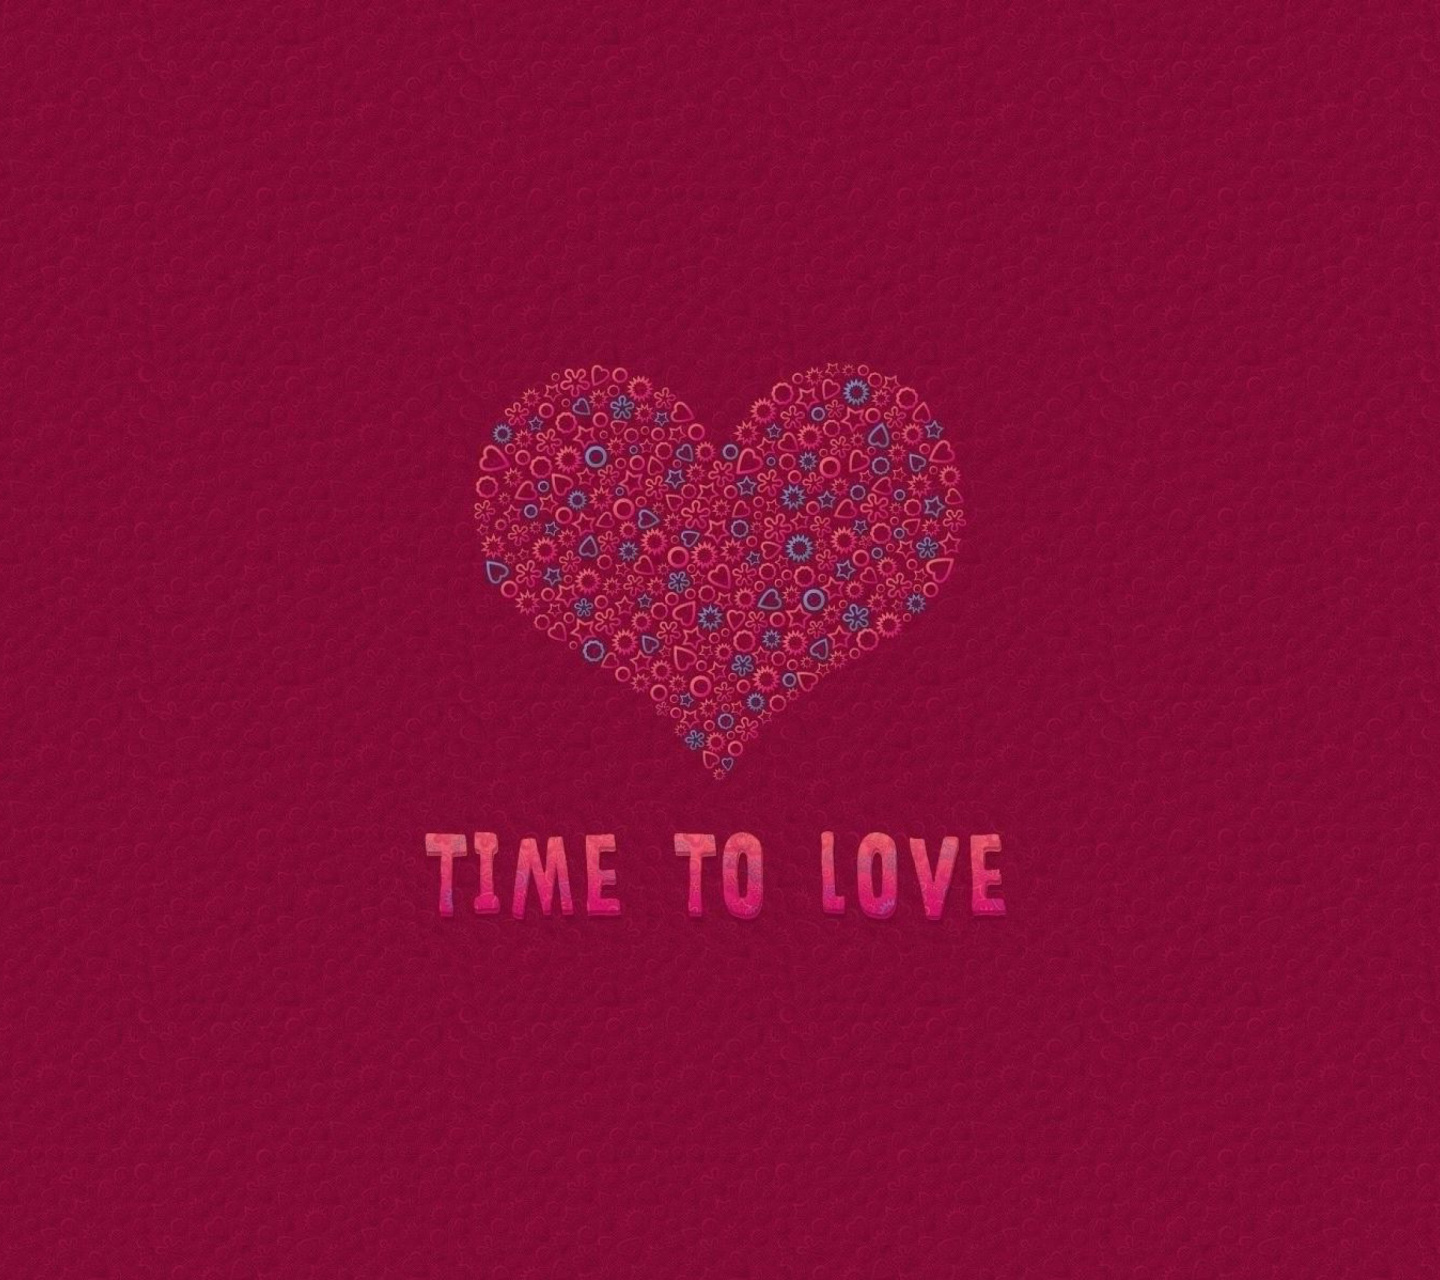 Time to Love wallpaper 1440x1280